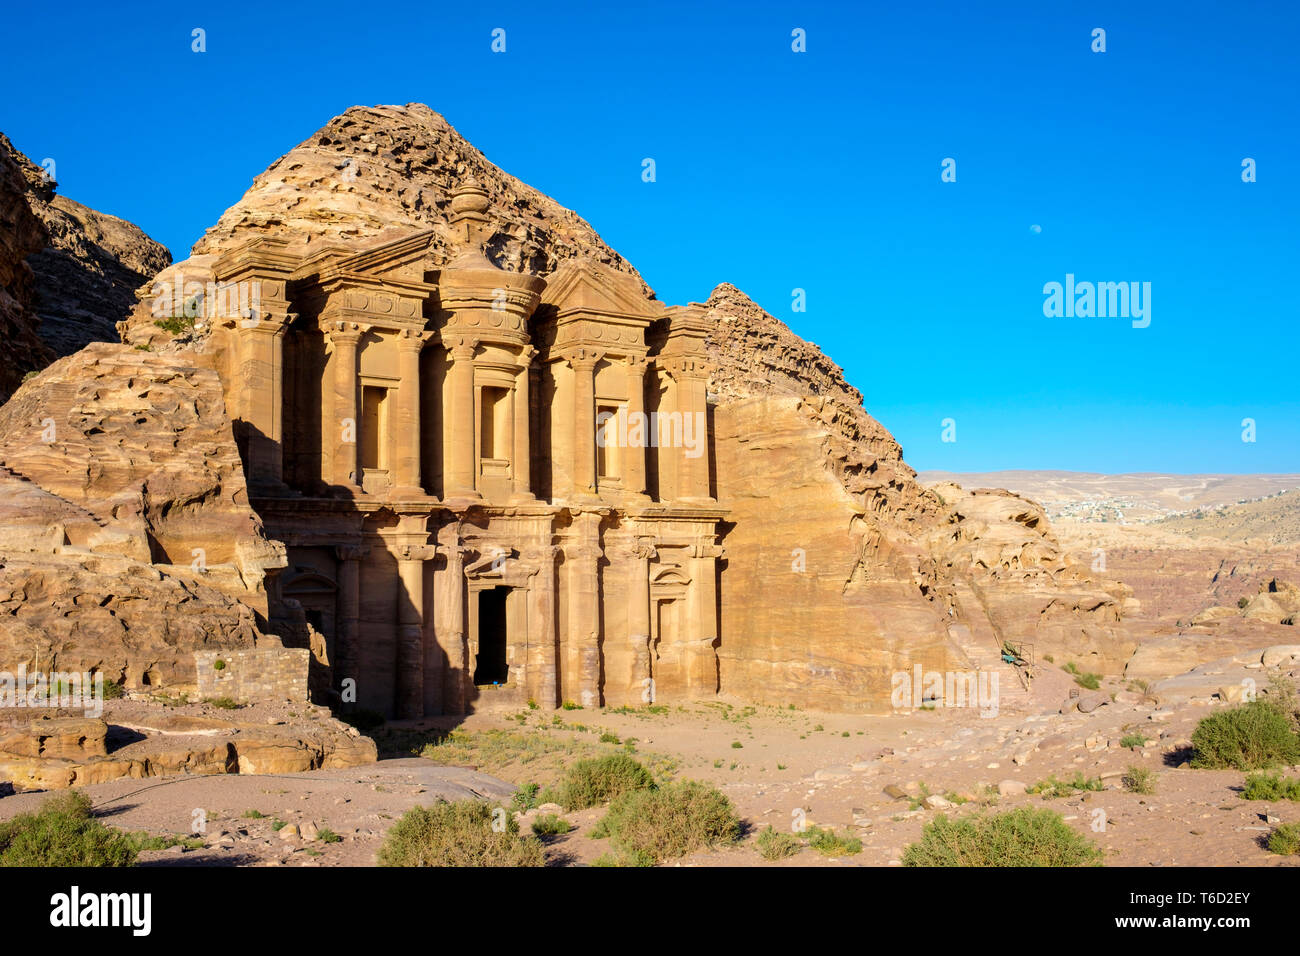 Jordan, Ma'an Governorate, Petra. UNESCO World Heritage Site. Ad-Deir, the Monastery carved into sandstone cliff face. Stock Photo